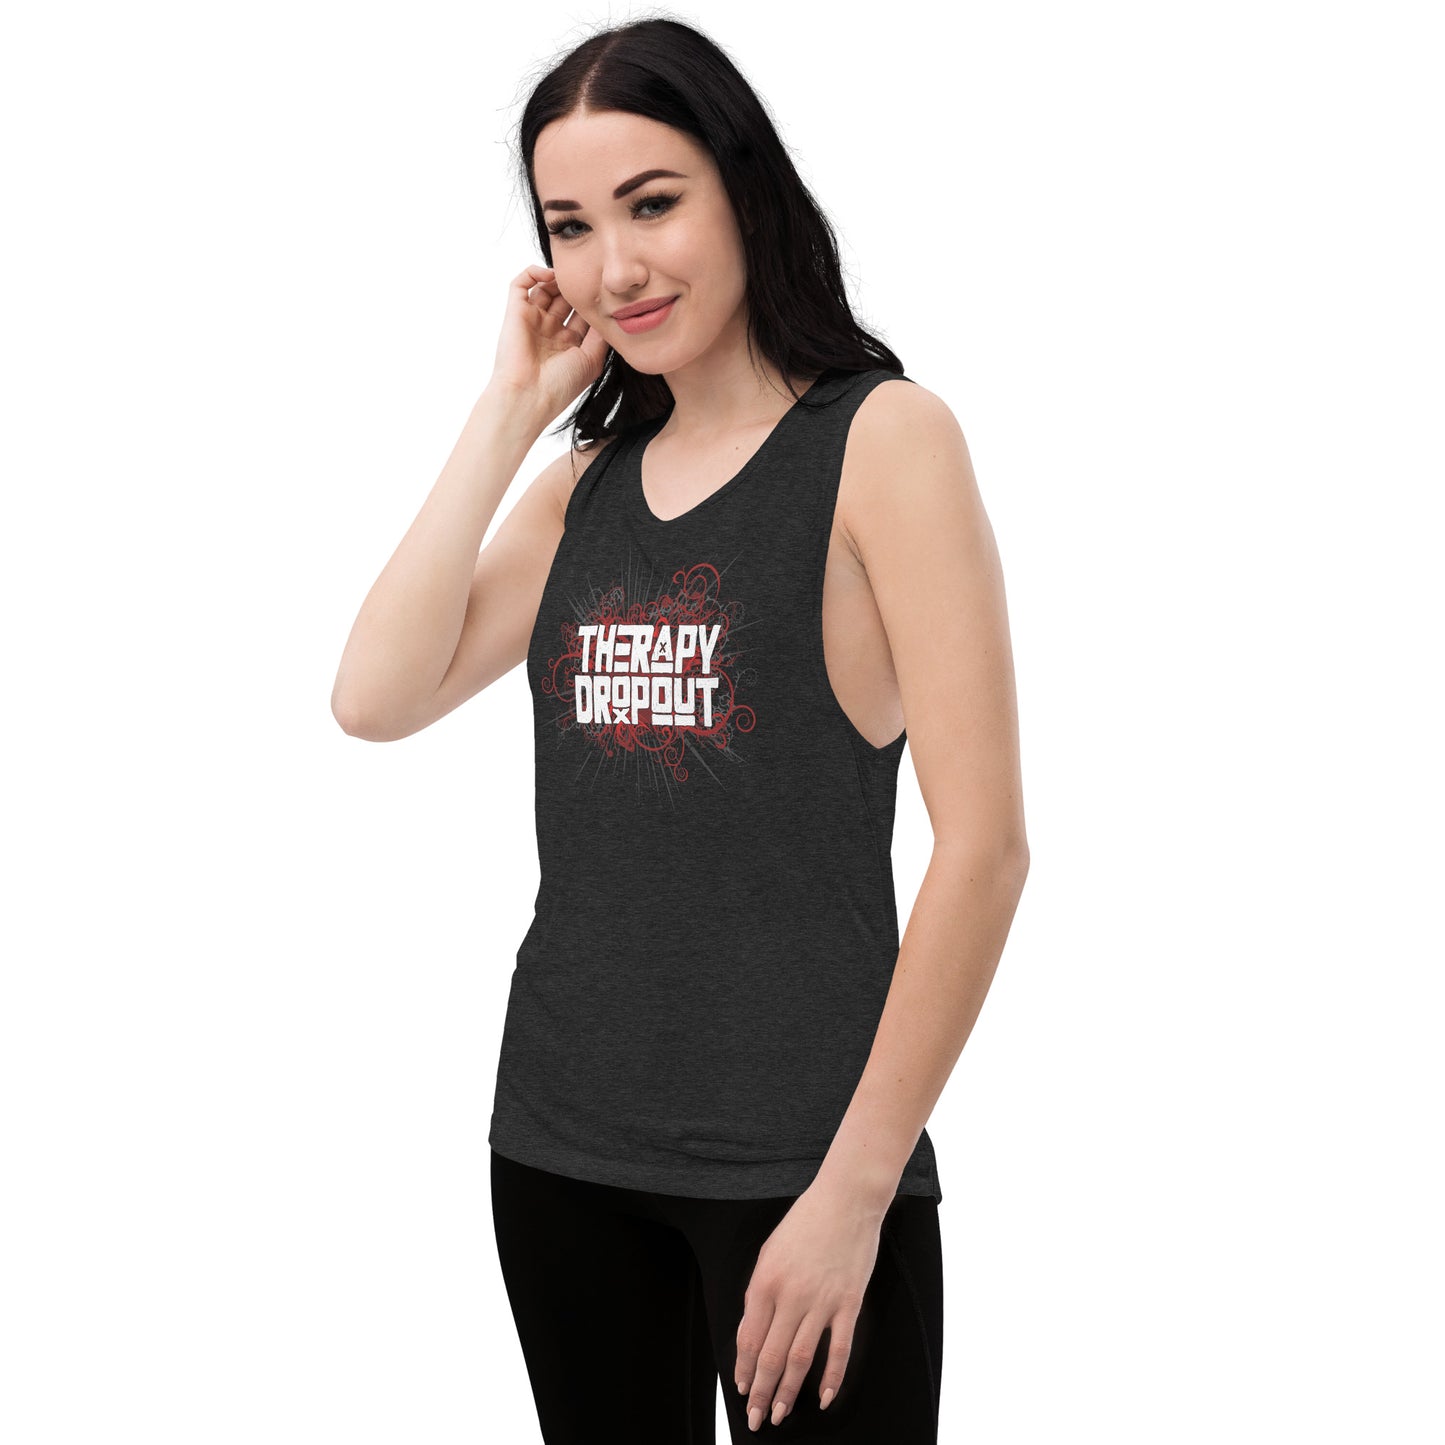 THERAPY DROPOUT Ladies’ Muscle Tank